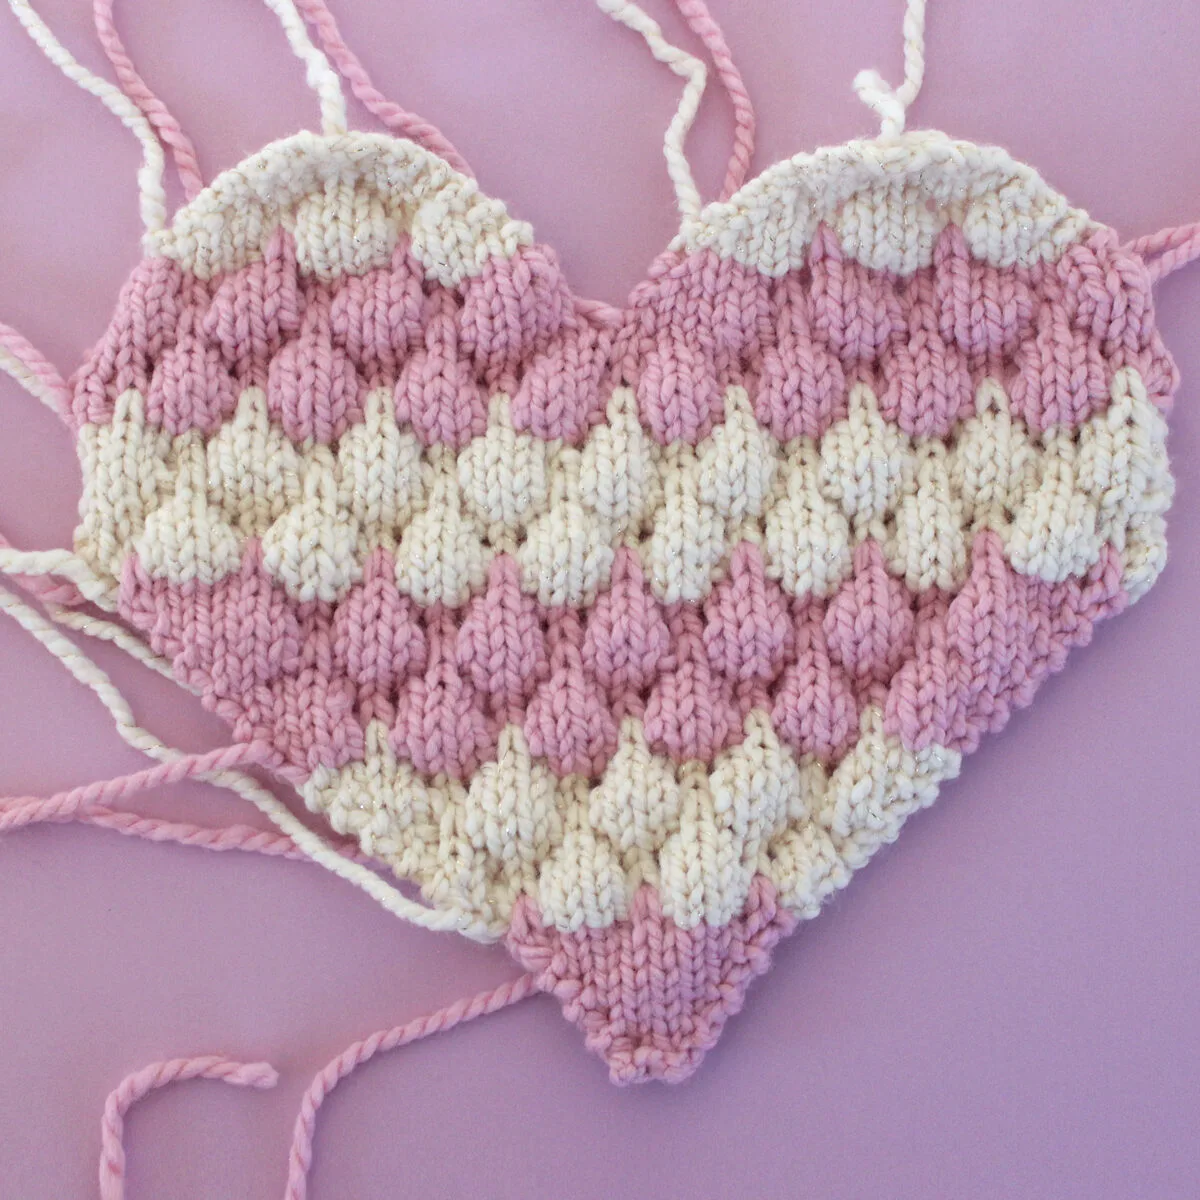 One side of the heart pillow in bubble stitch in pink and white yarn colors.